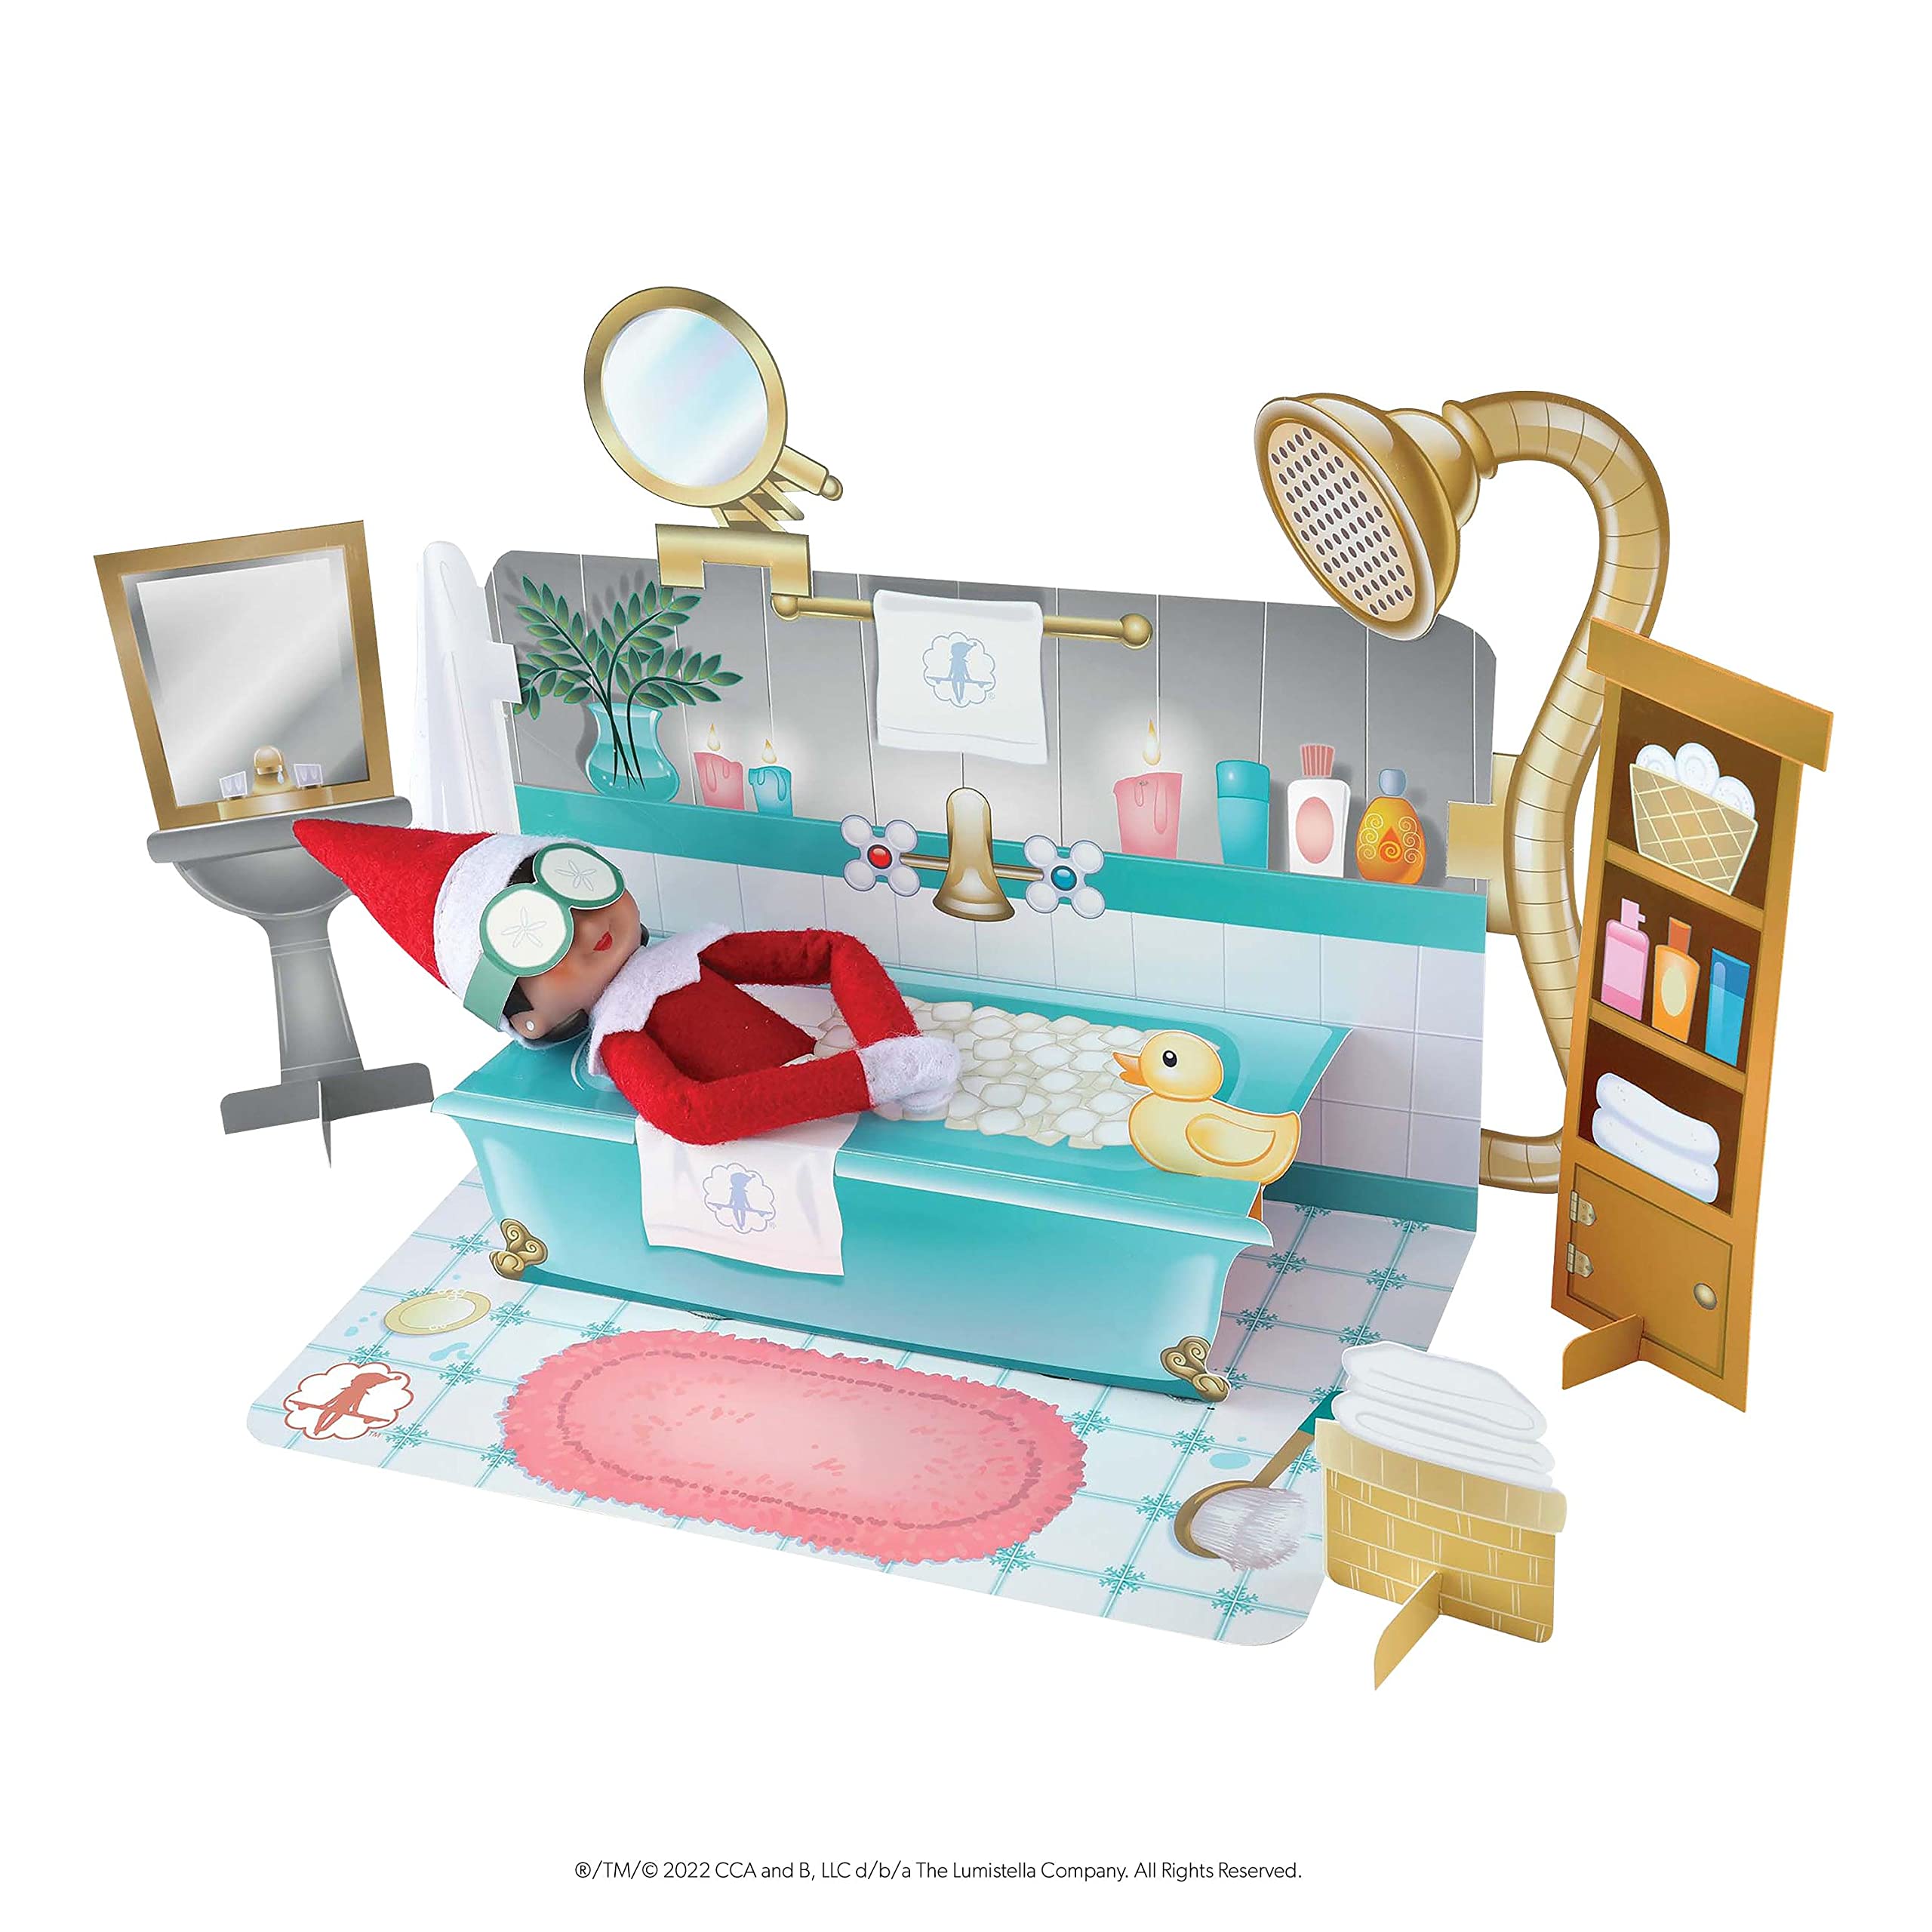 The Elf on the Shelf Insta-Moment Pop-Ups-Includes 3 Fun backdrops and pop Out Accessories for Easy Scenes!